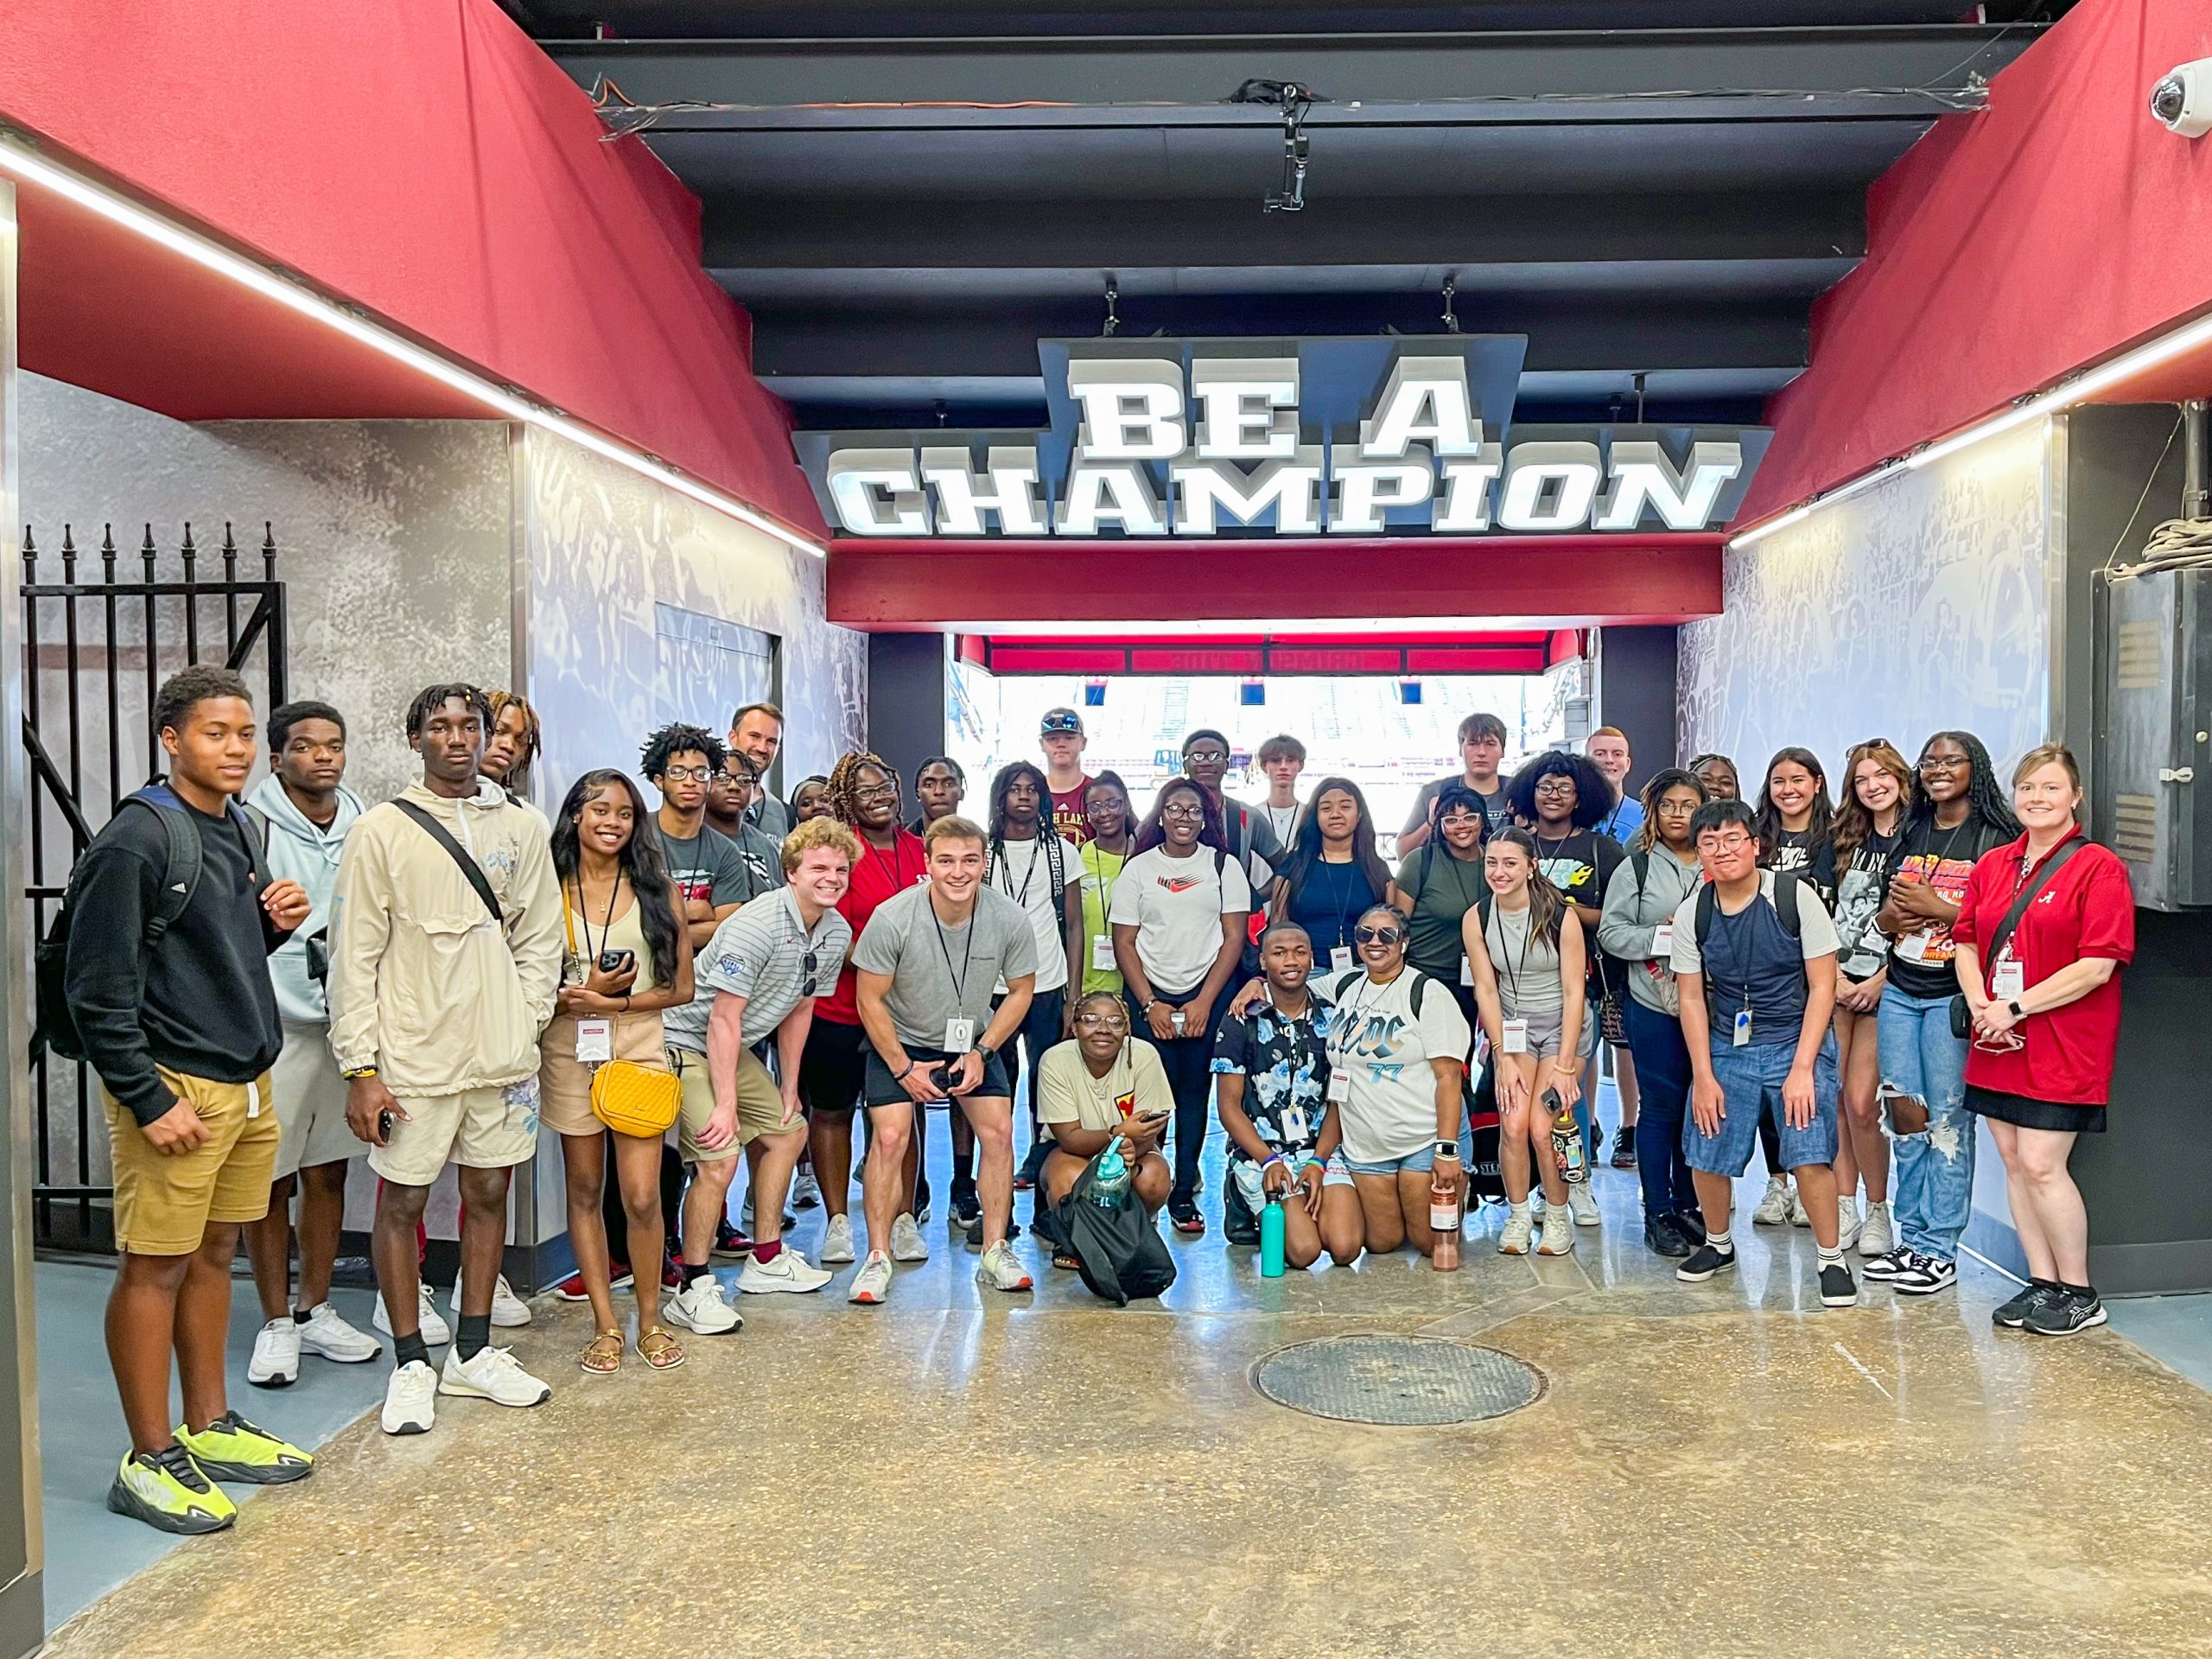 Large group of teenagers standing under a sign that says "Be a champion".